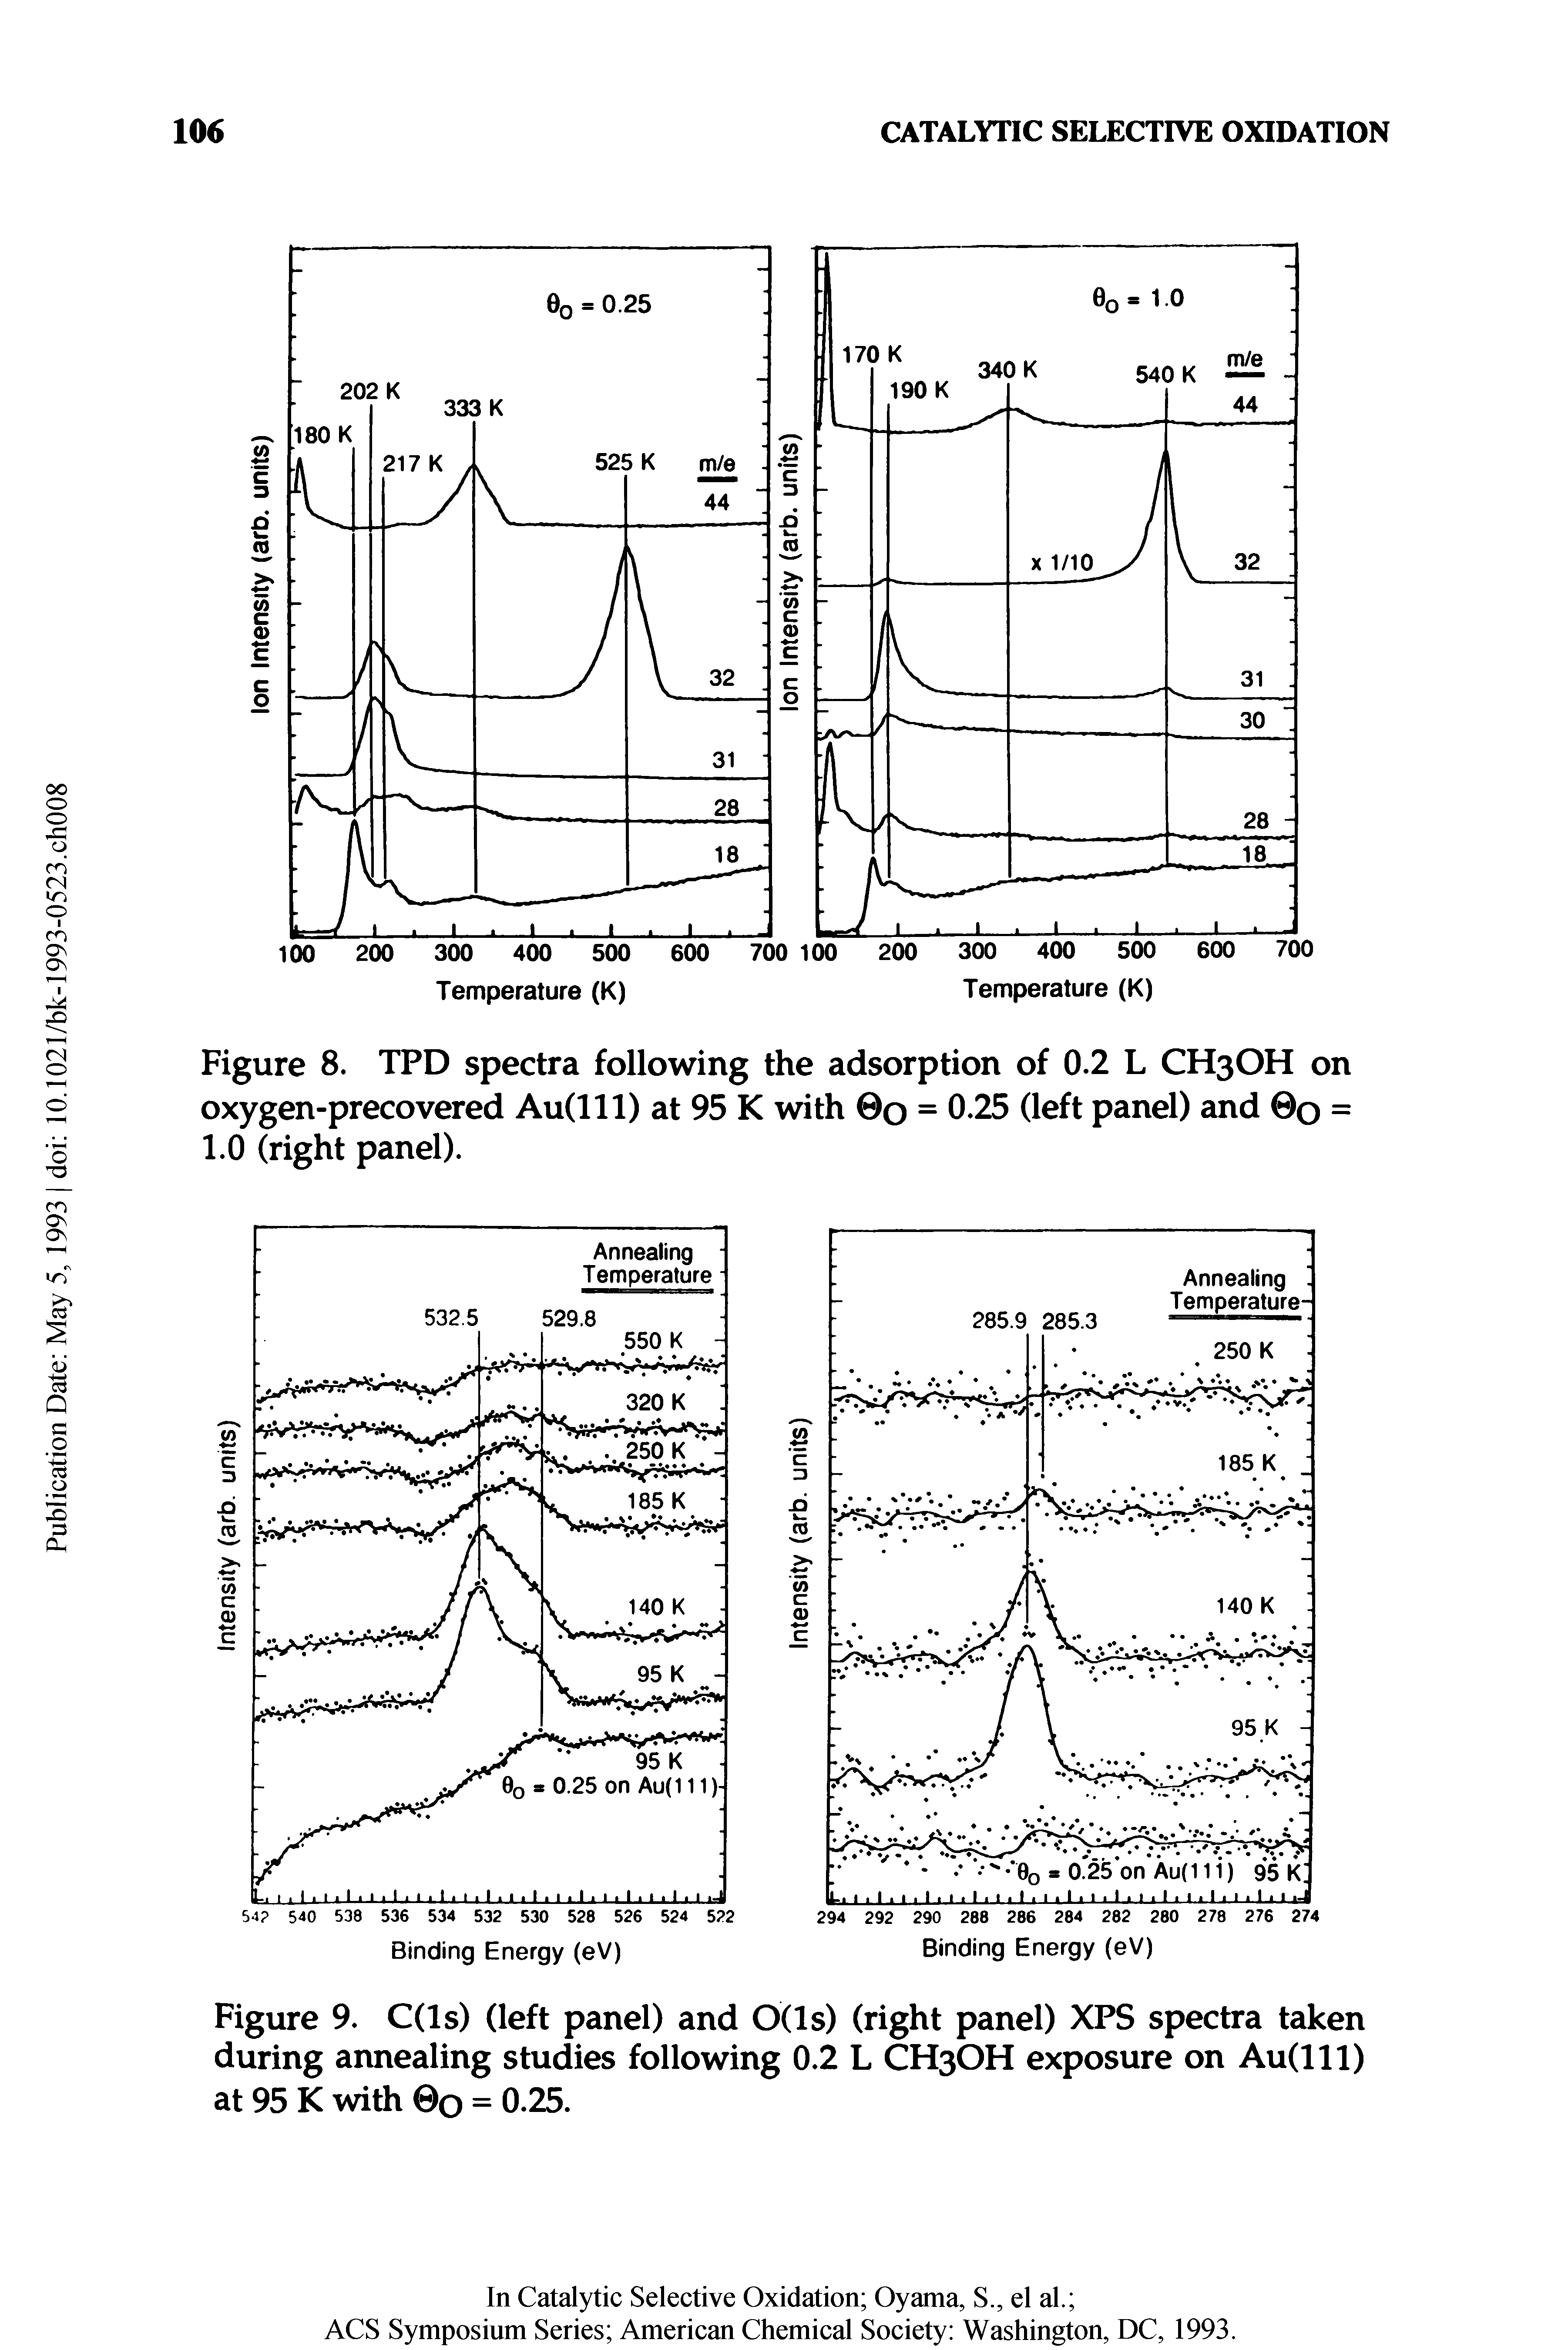 Figure 9. C(ls) (left panel) and 0(ls) (right panel) XPS spectra taken during annealing studies following 0.2 L CH3OH exposure on Au(lll) at 95 K with 0Q = 0.25.